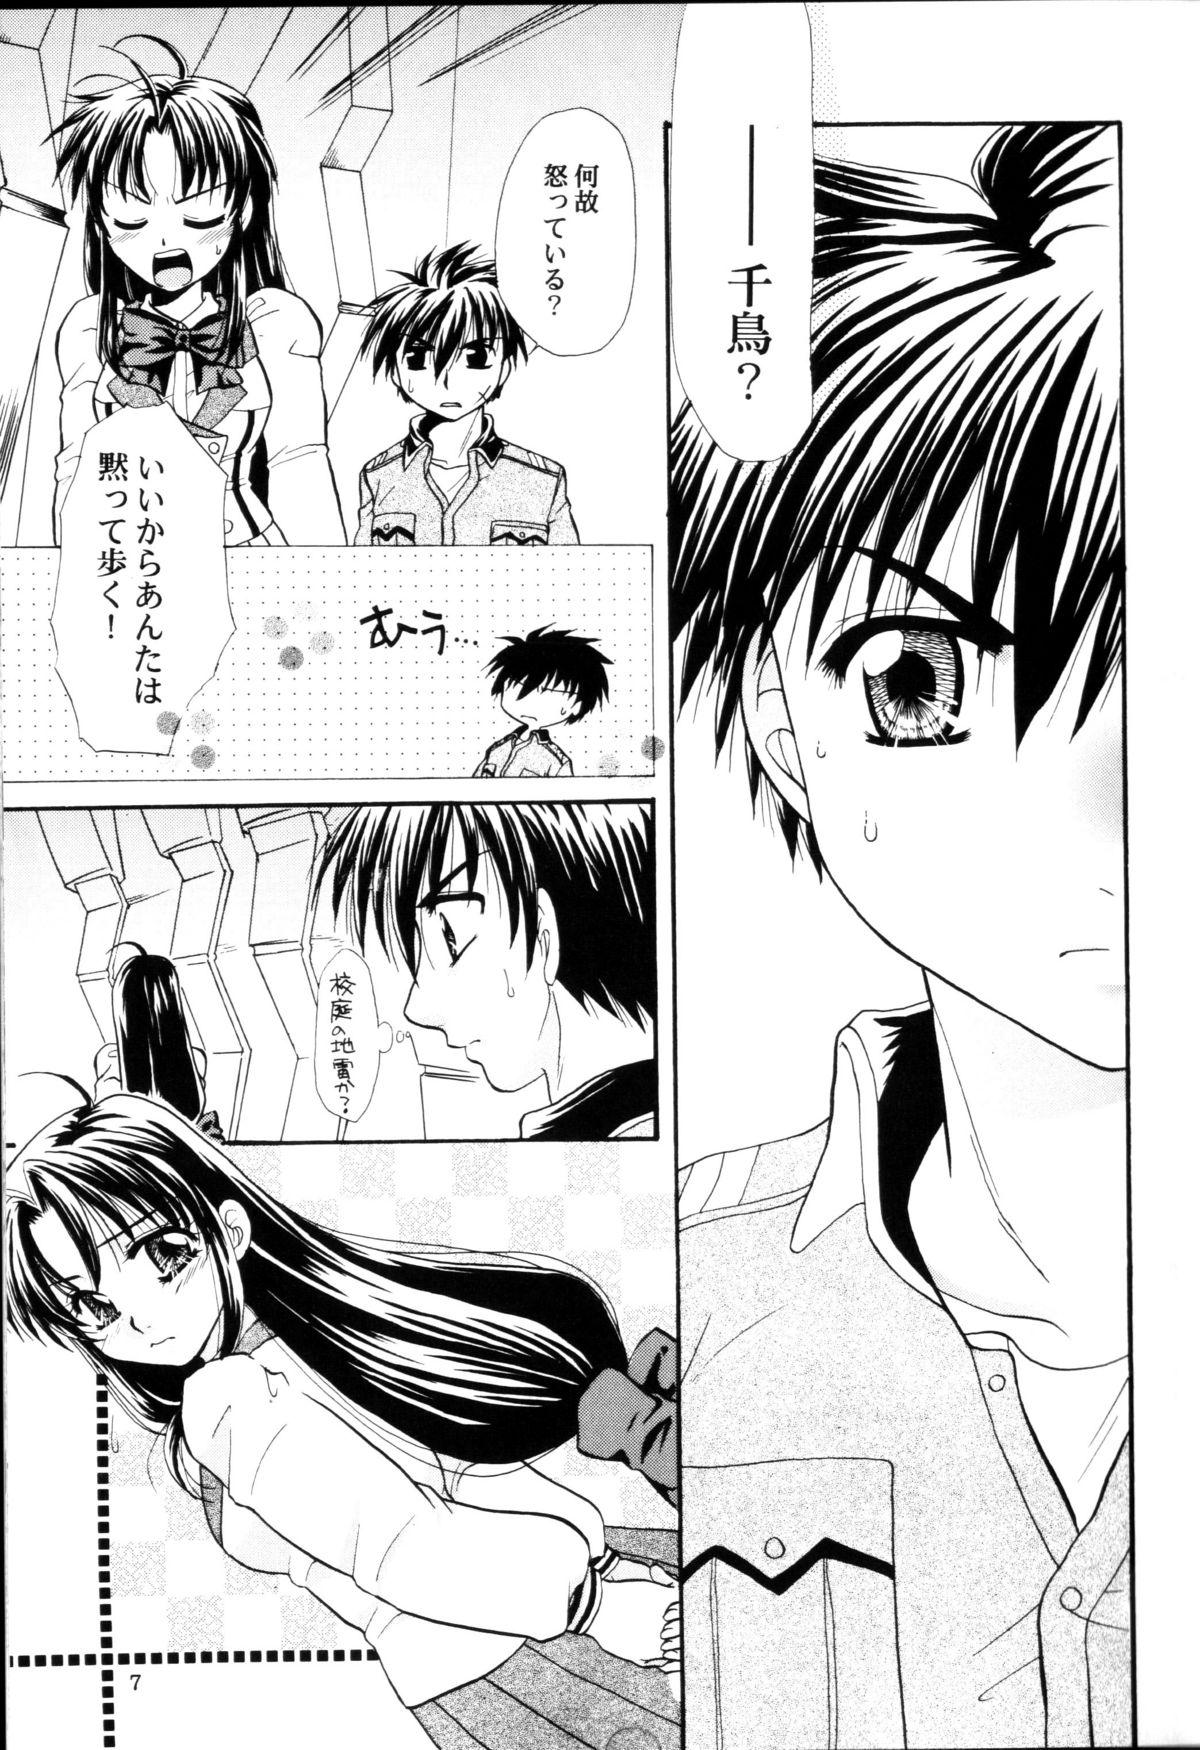 Clit A.I. - Full metal panic Bitch - Page 6